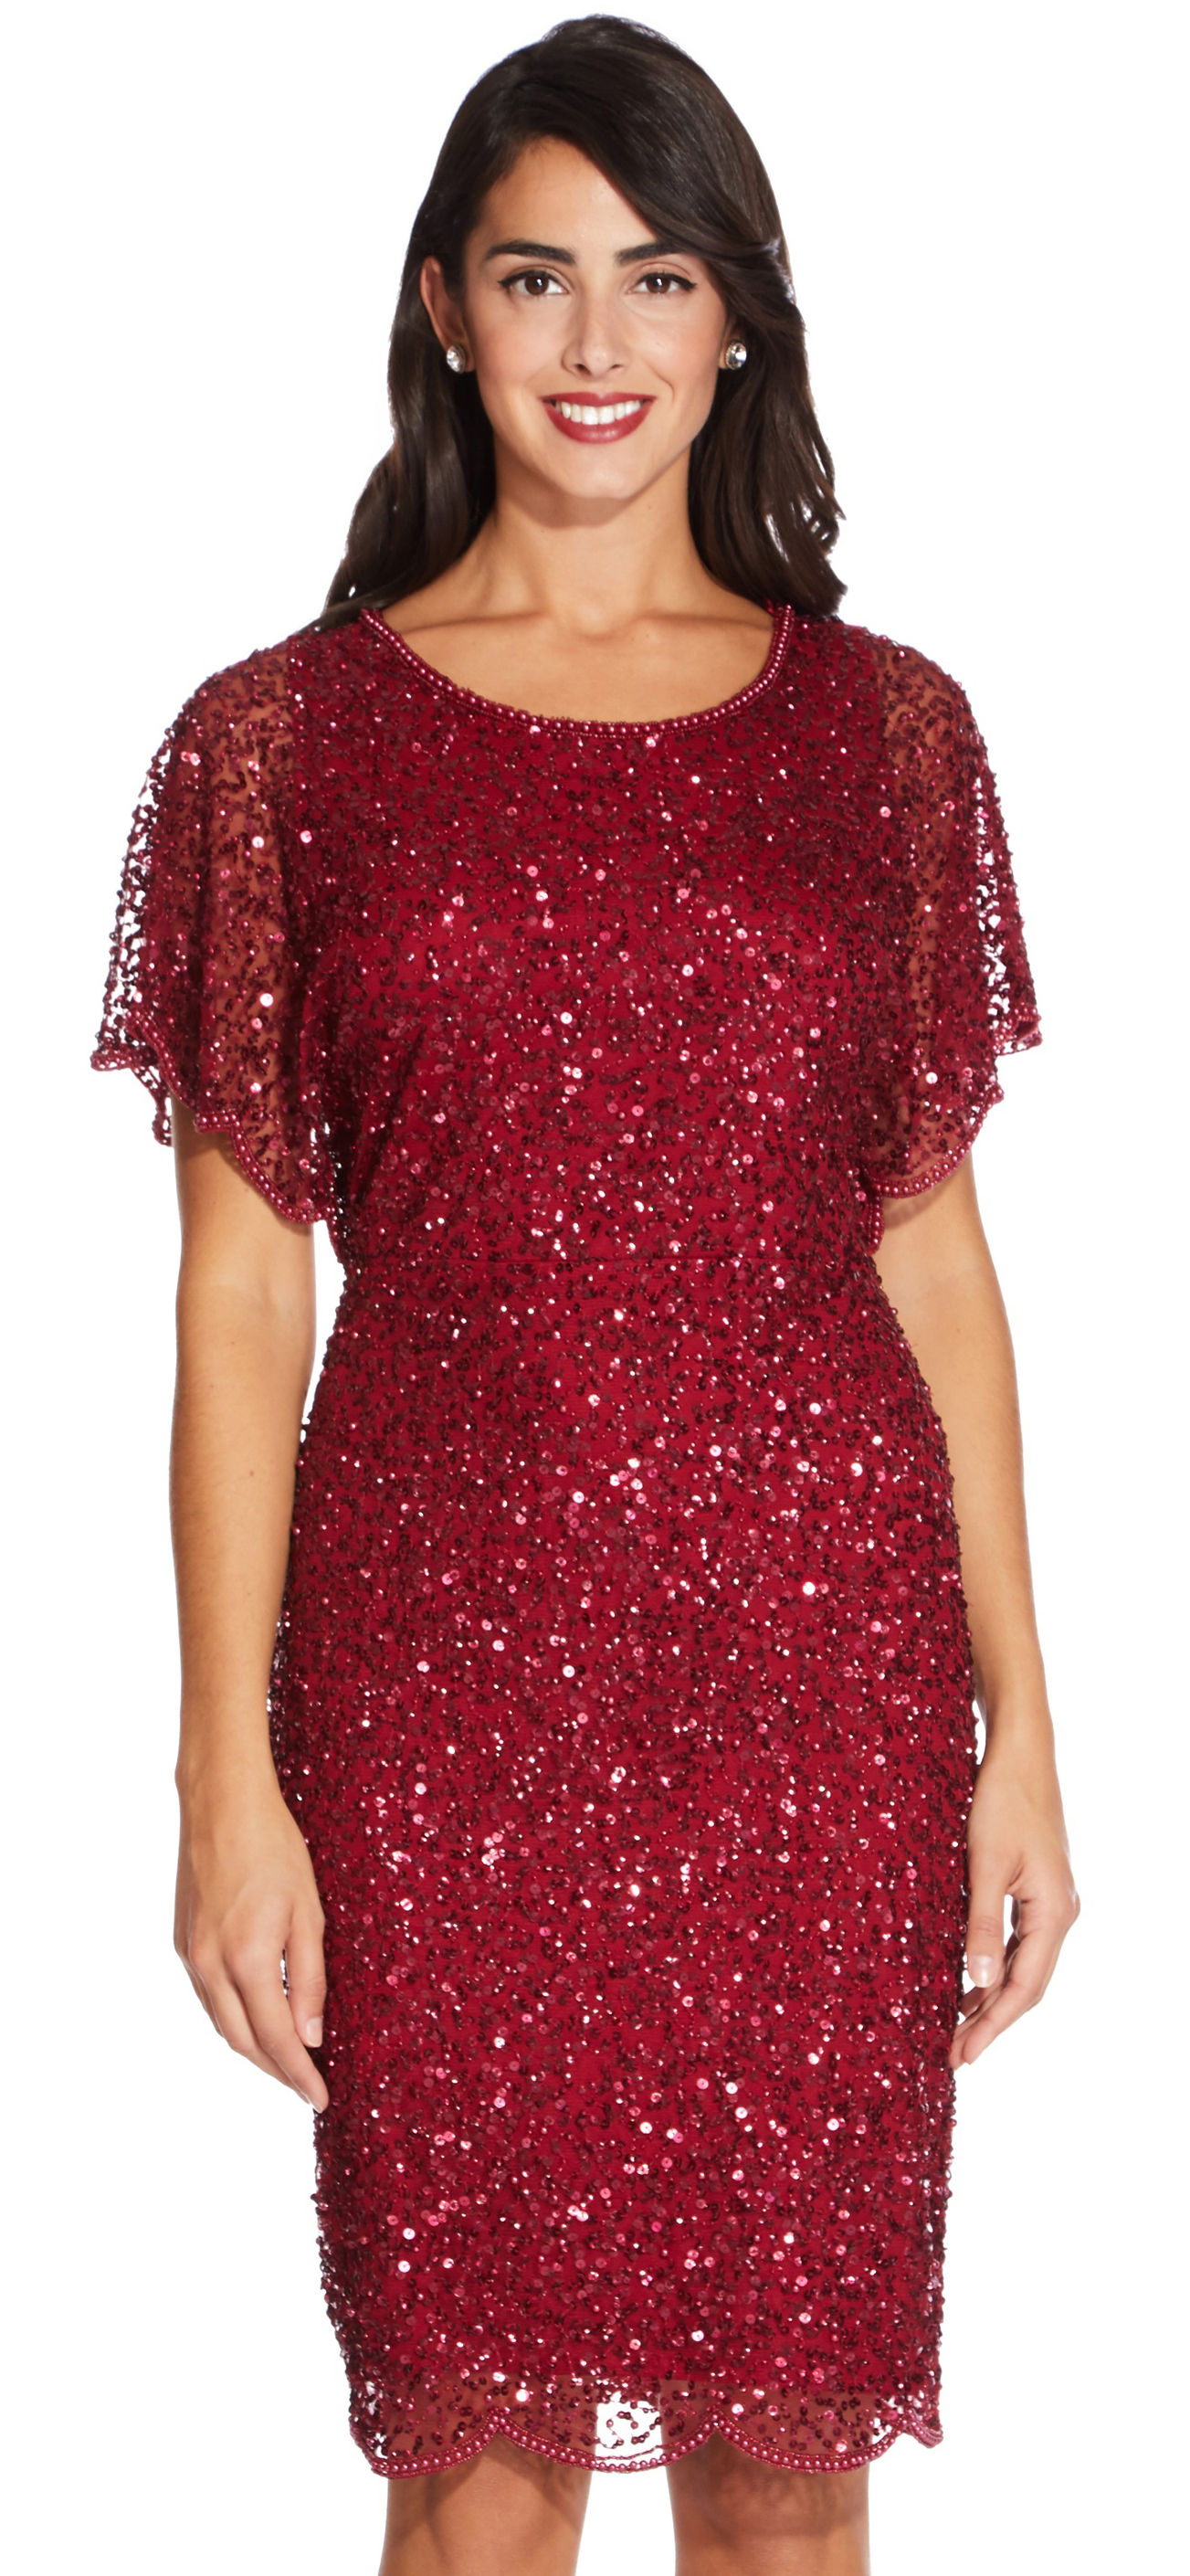 sequin beaded cocktail dress with flutter sleeves and scallop trim